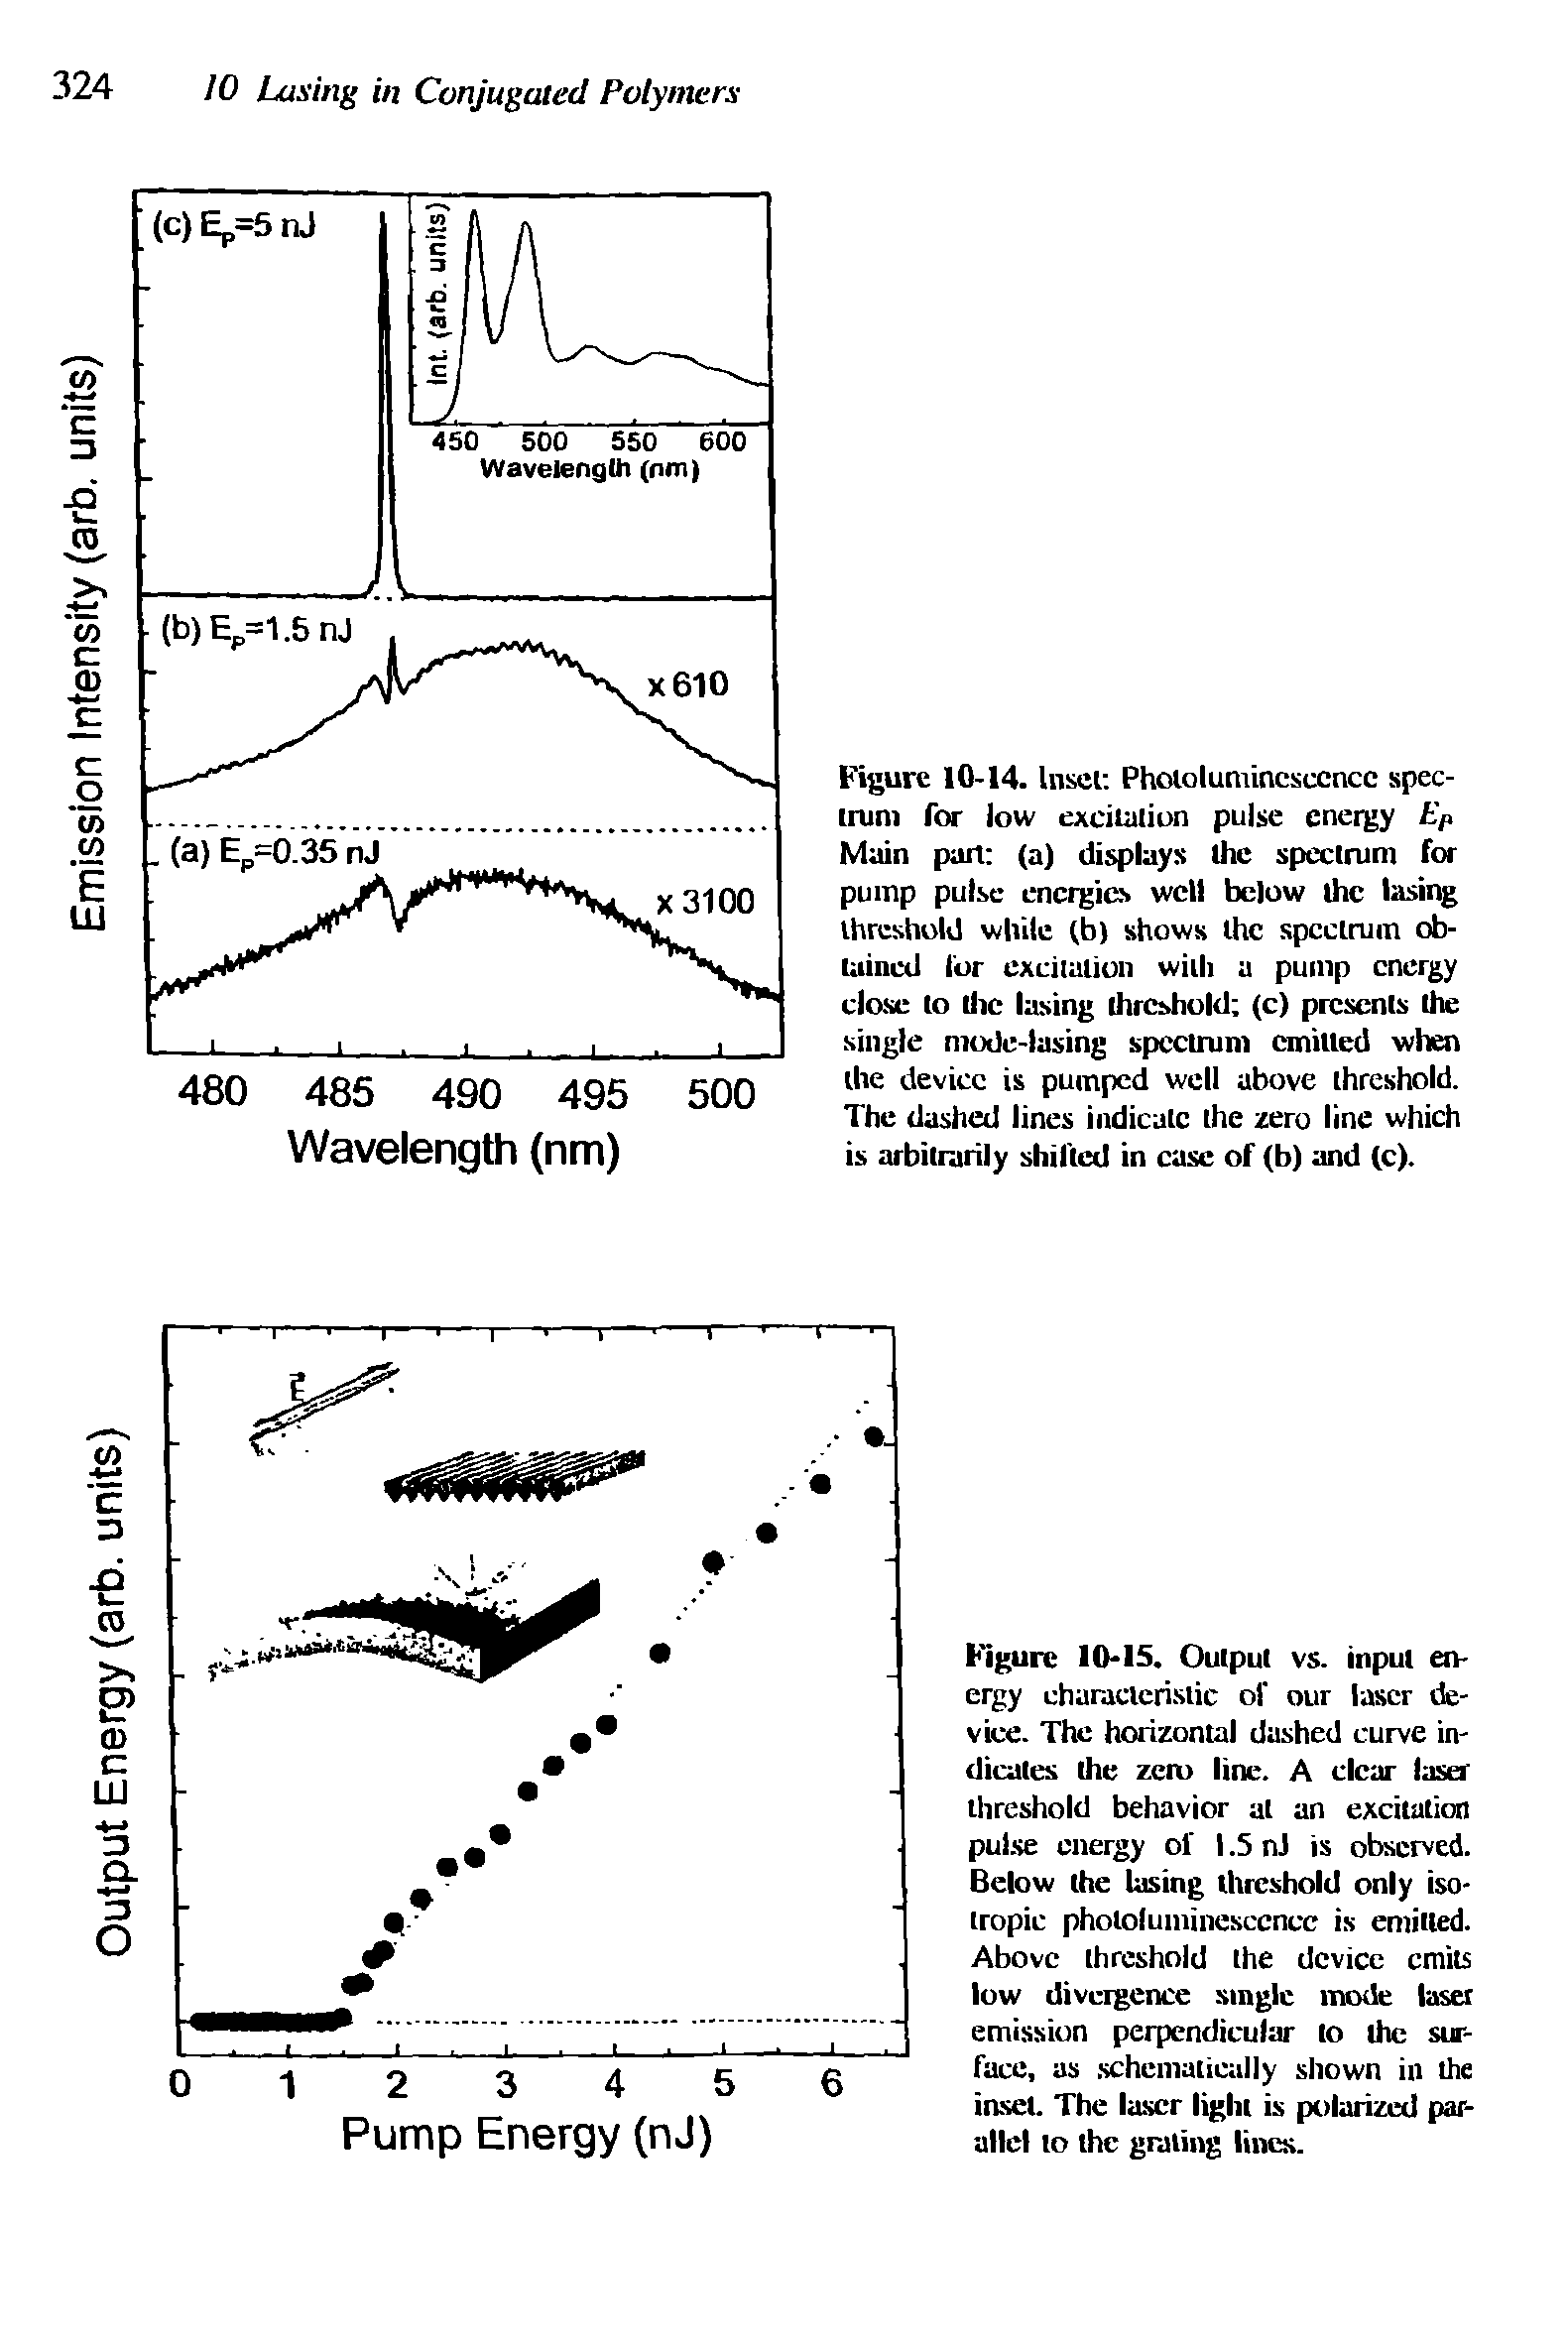 Figure 10-15. Output vs. input energy characteristic of our laser device. The horizontal dashed curve indicates the zero line. A clear laser threshold behavior at an excitation pulse energy ol 1.5 nJ is observed. Below the lasing threshold only isotropic phololuminesccncc is entitled. Above threshold the device emits low divergence single mode laser emission perpendicular to the surface, as schematically shown in the inset. The laser light is polarized parallel to the grating lines.